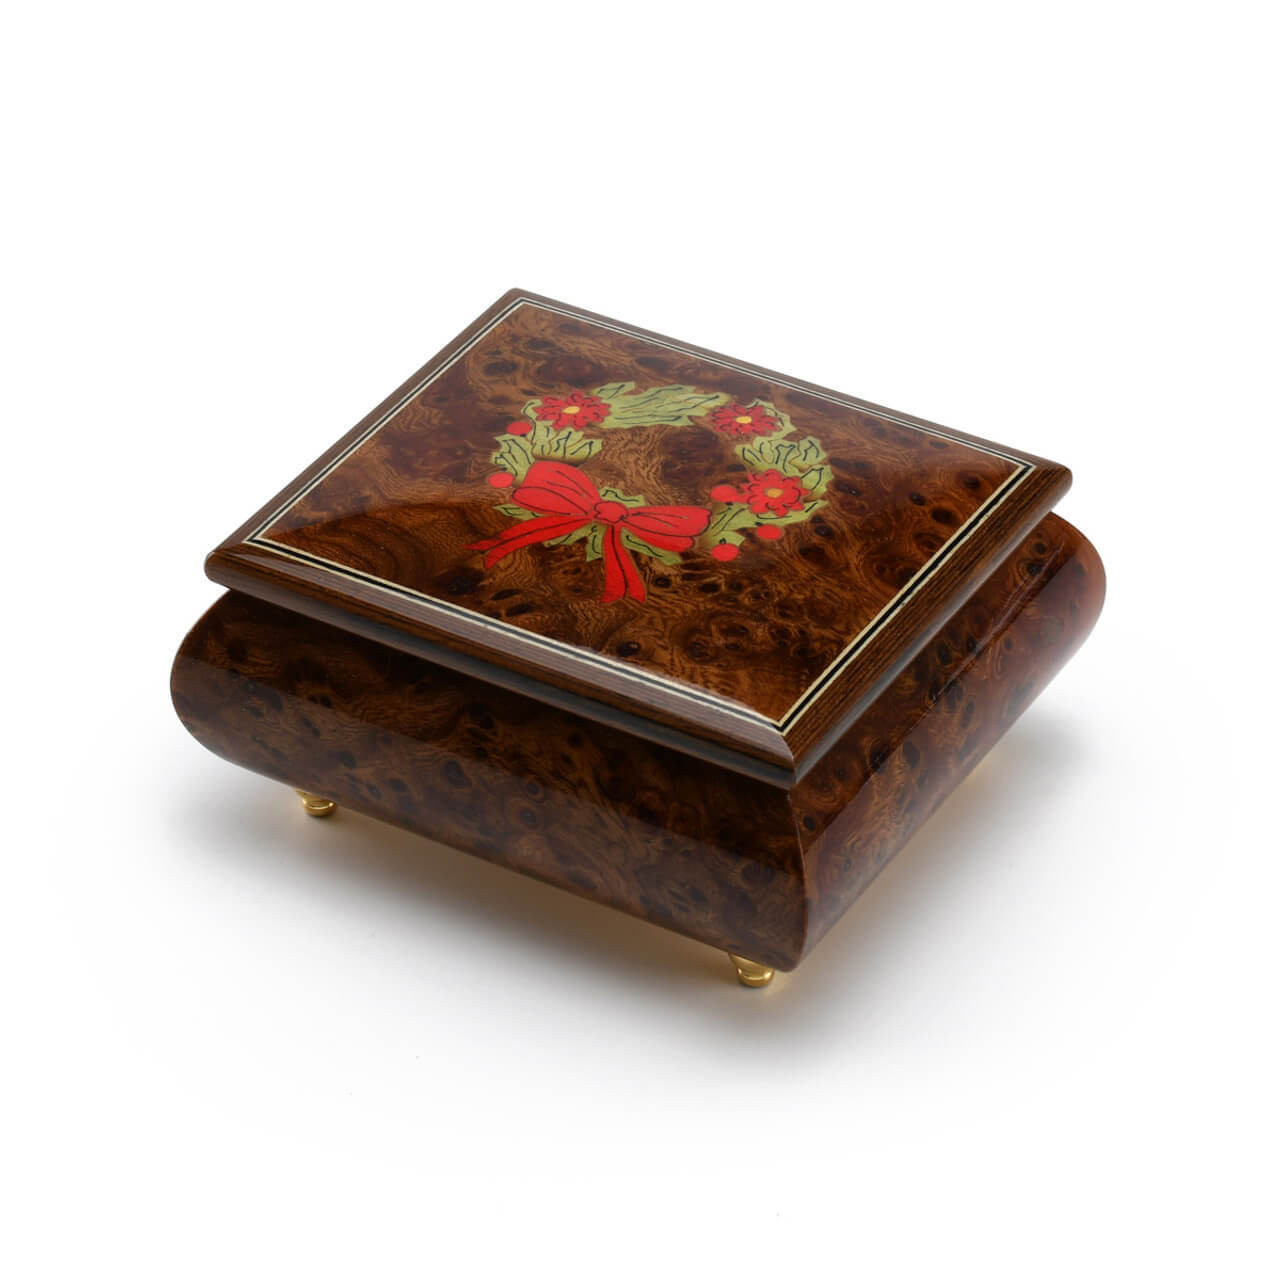 Image of Handcrafted 18 Note Sorrento Music Box with Christmas Theme Wood Inlay of a Christmas Wreath